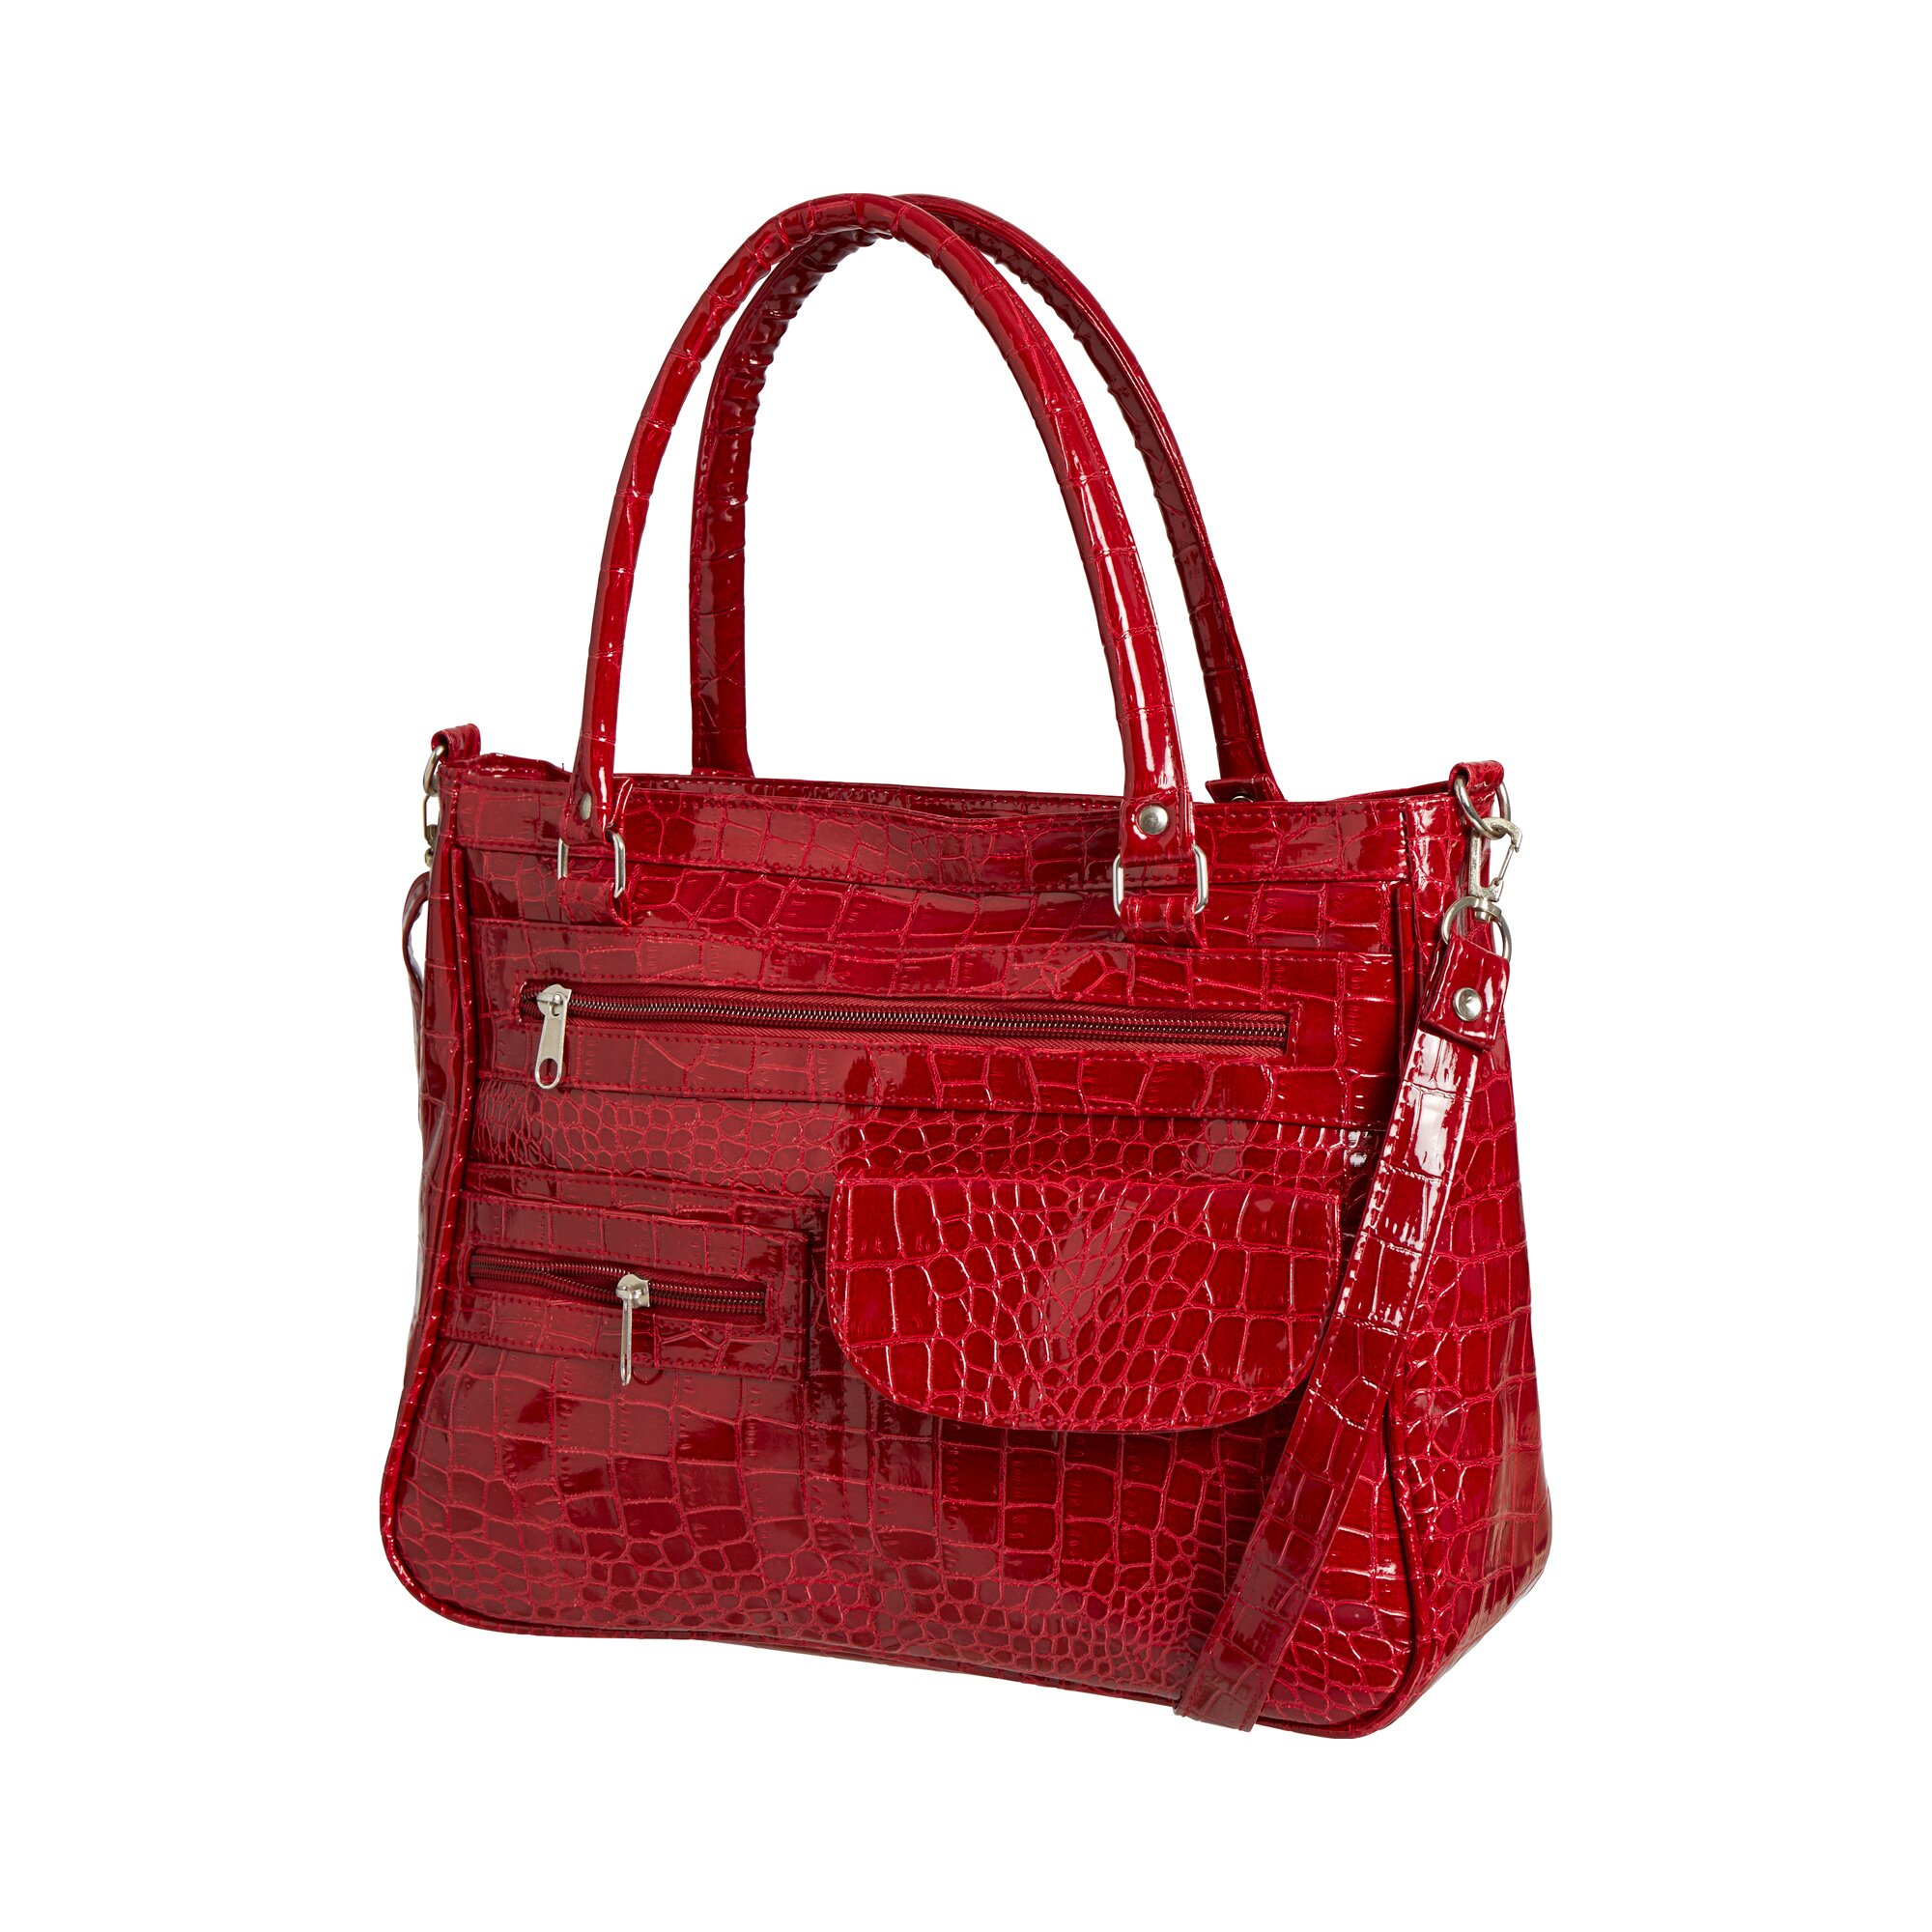 Image of Handtasche "Lady in Red"